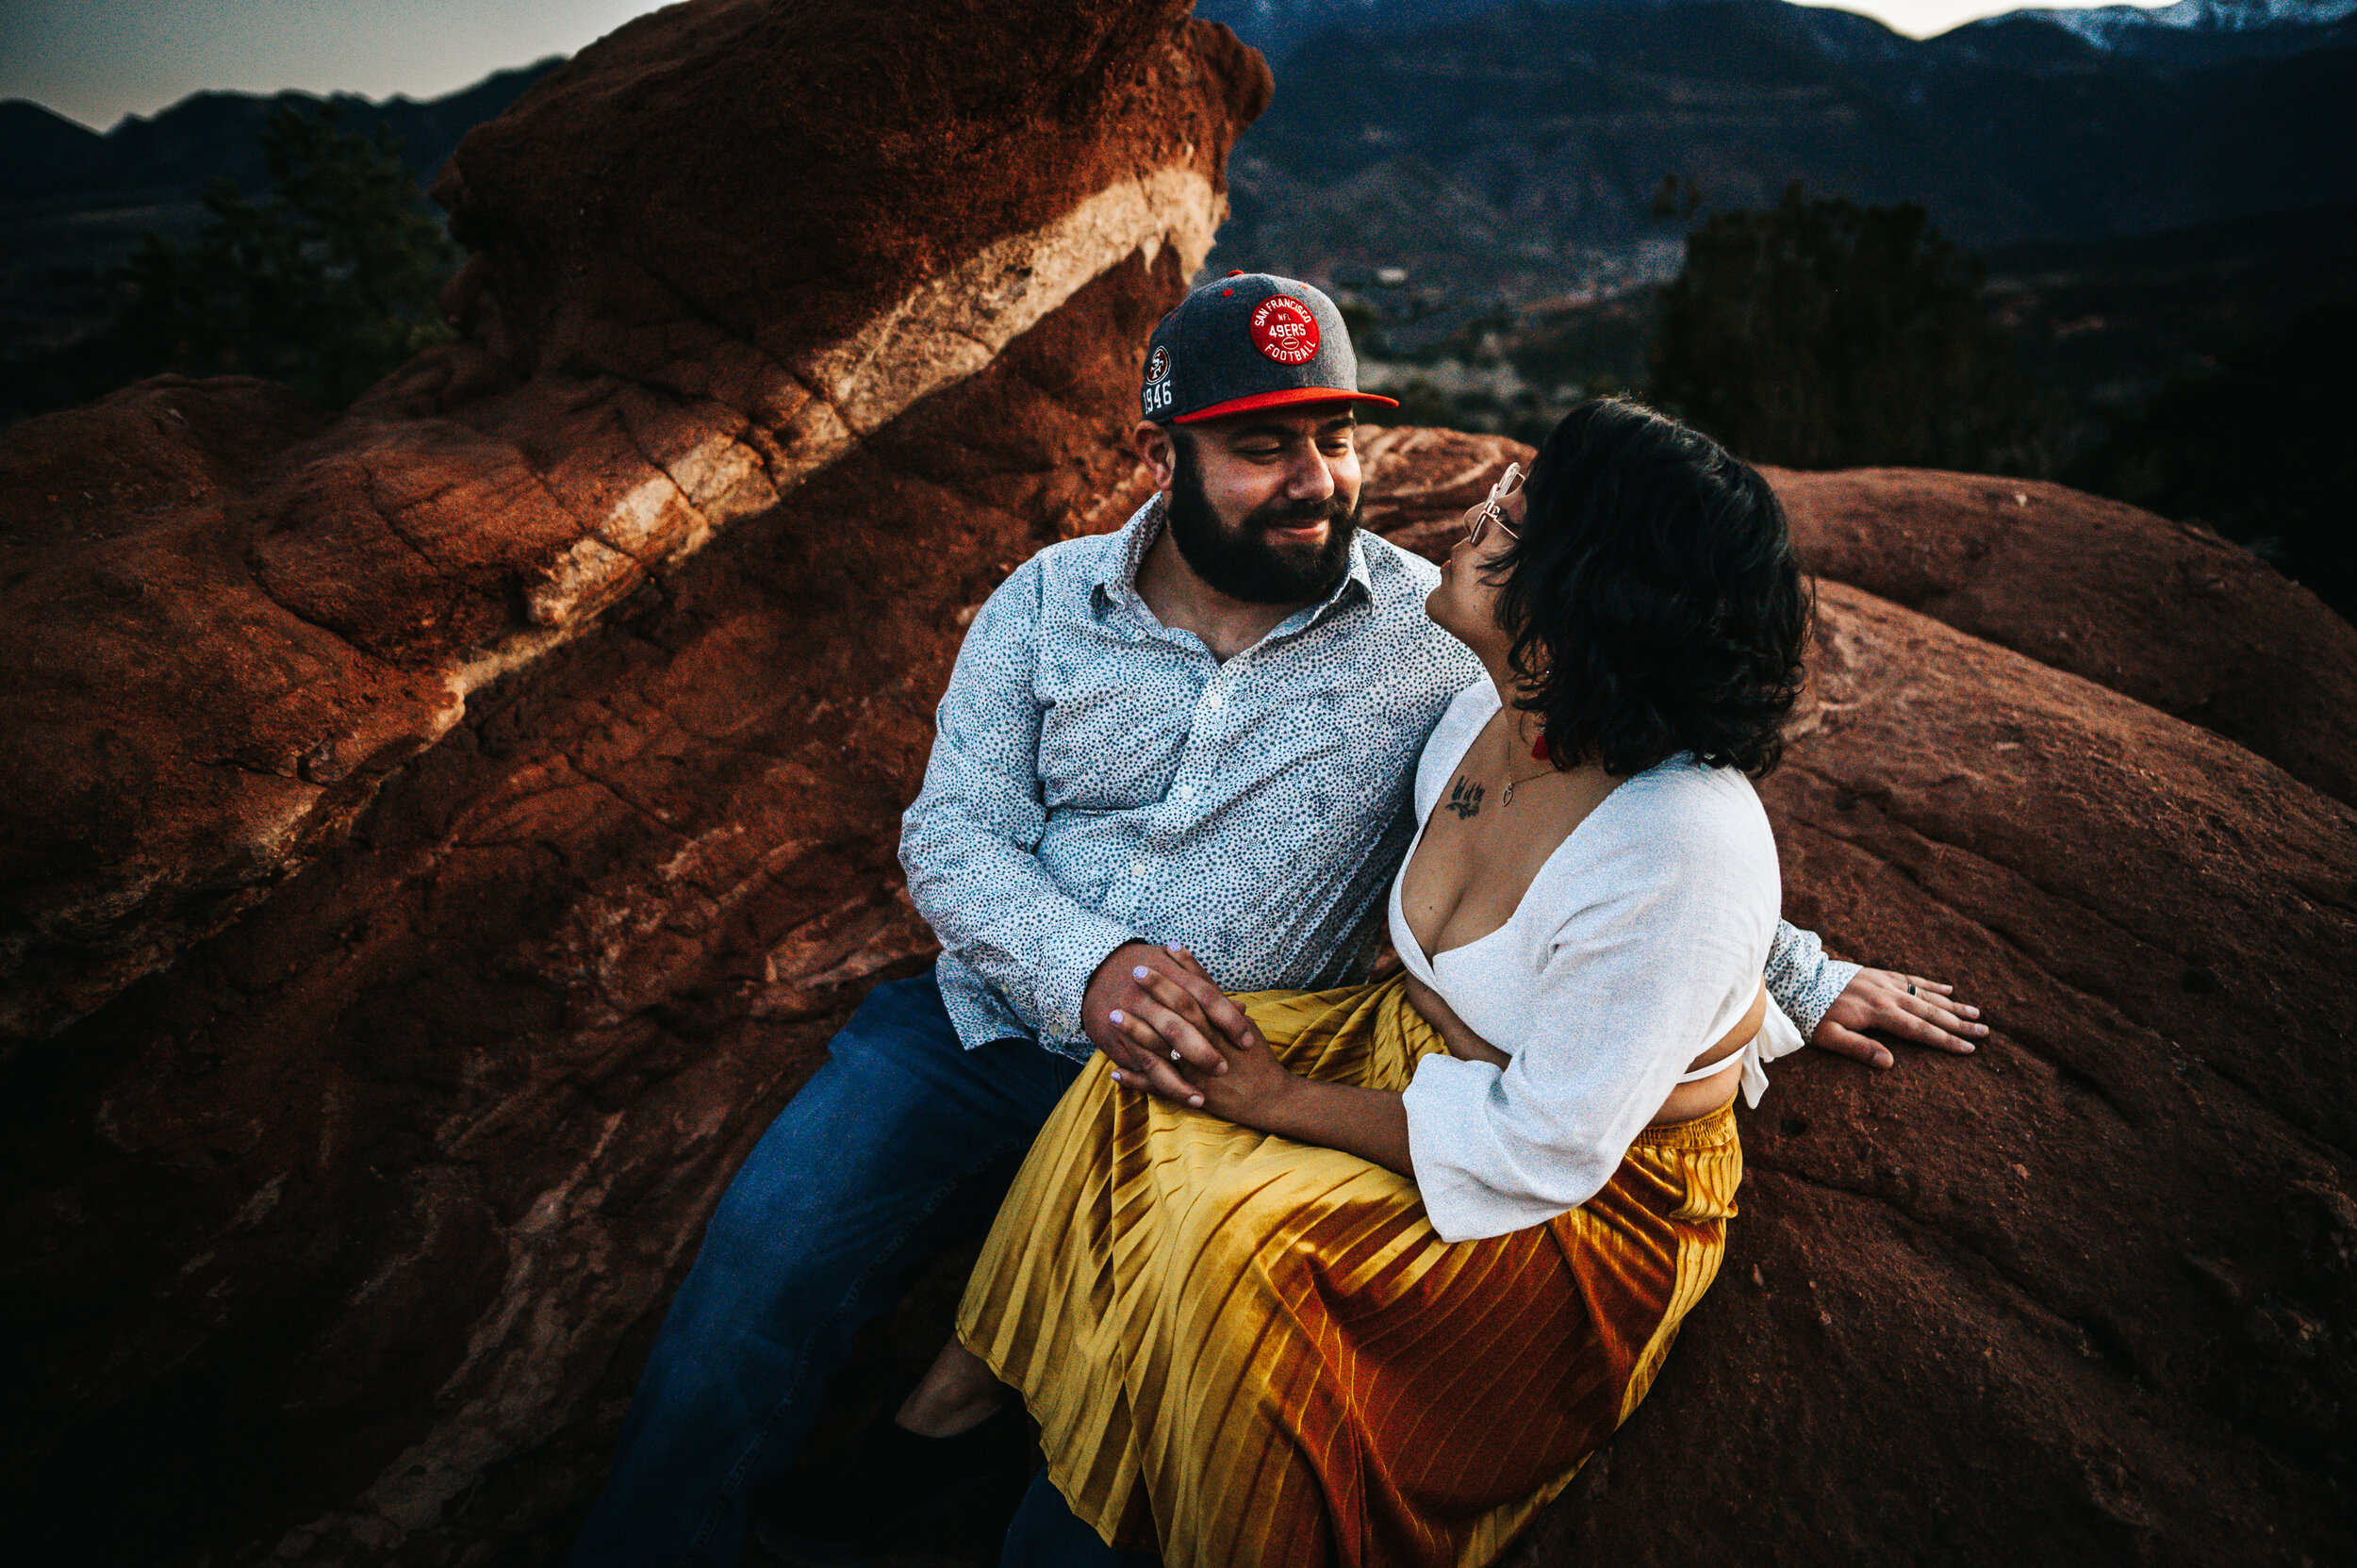 Caroline and Tommy Engagement Session Colorado Springs Colorado Garden of the Gods Wild Prairie Photography-20-2021.jpg